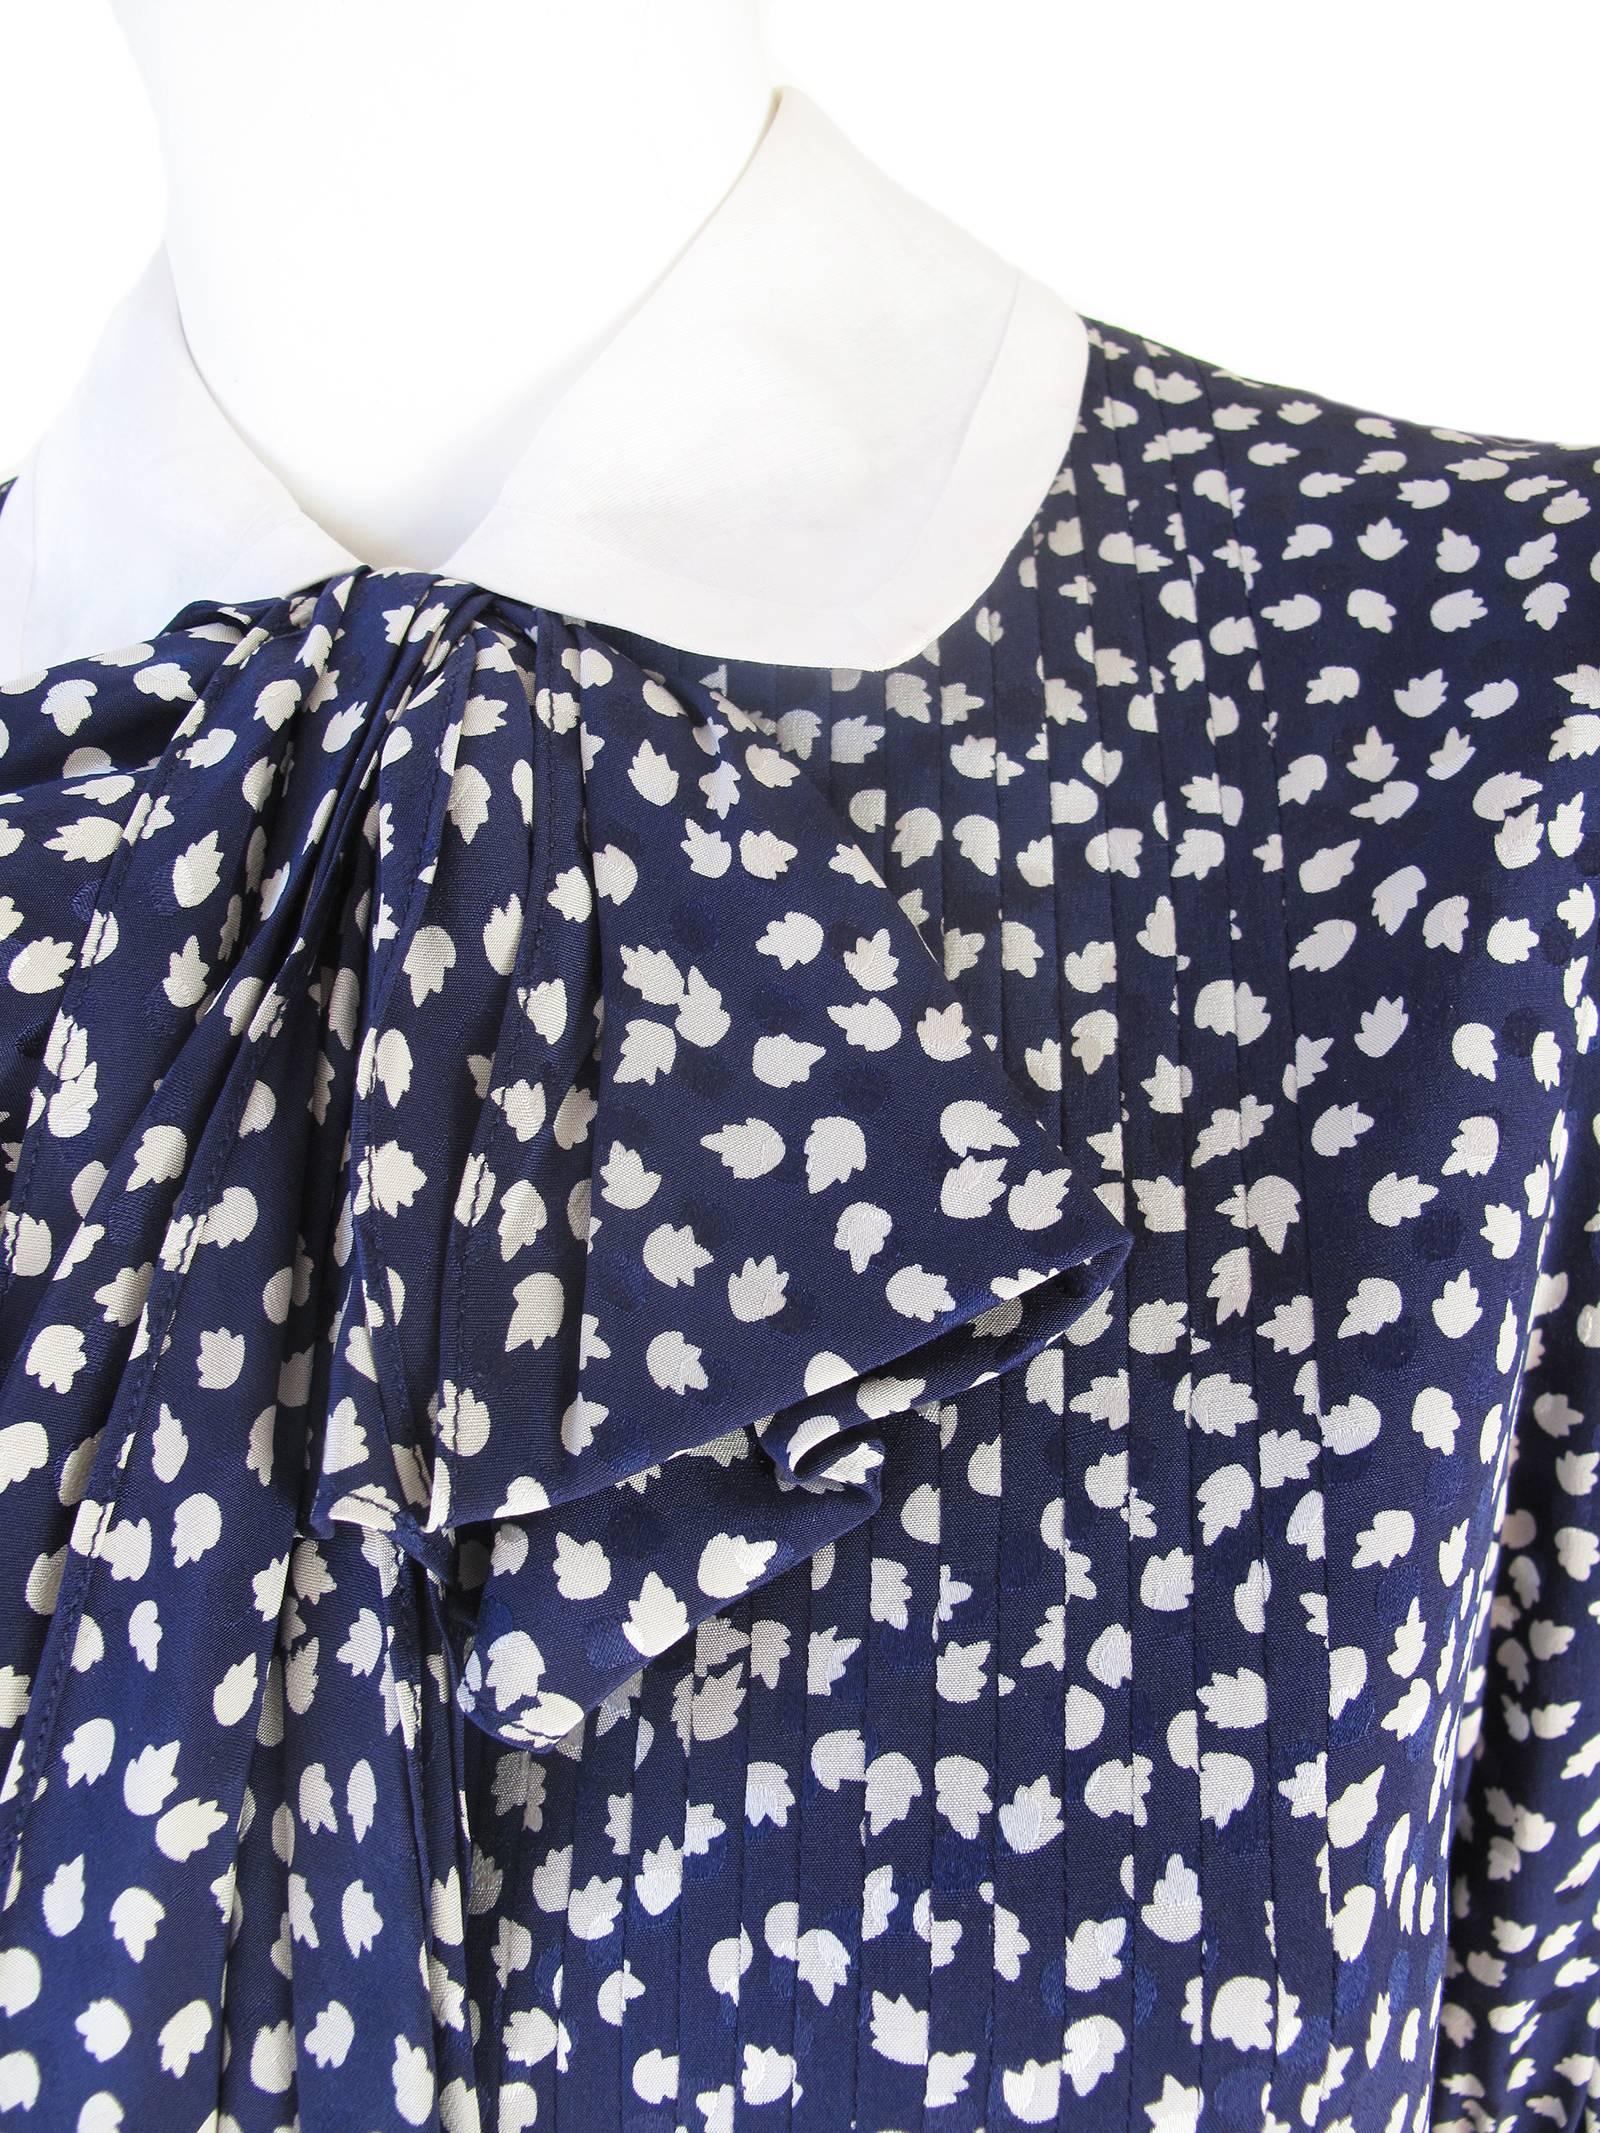 Oscar de la Renta silk polka dot dress.  Condition: Excellent. Size Large

We accept returns for refund, please see our terms.  We offer free ground shipping within the US